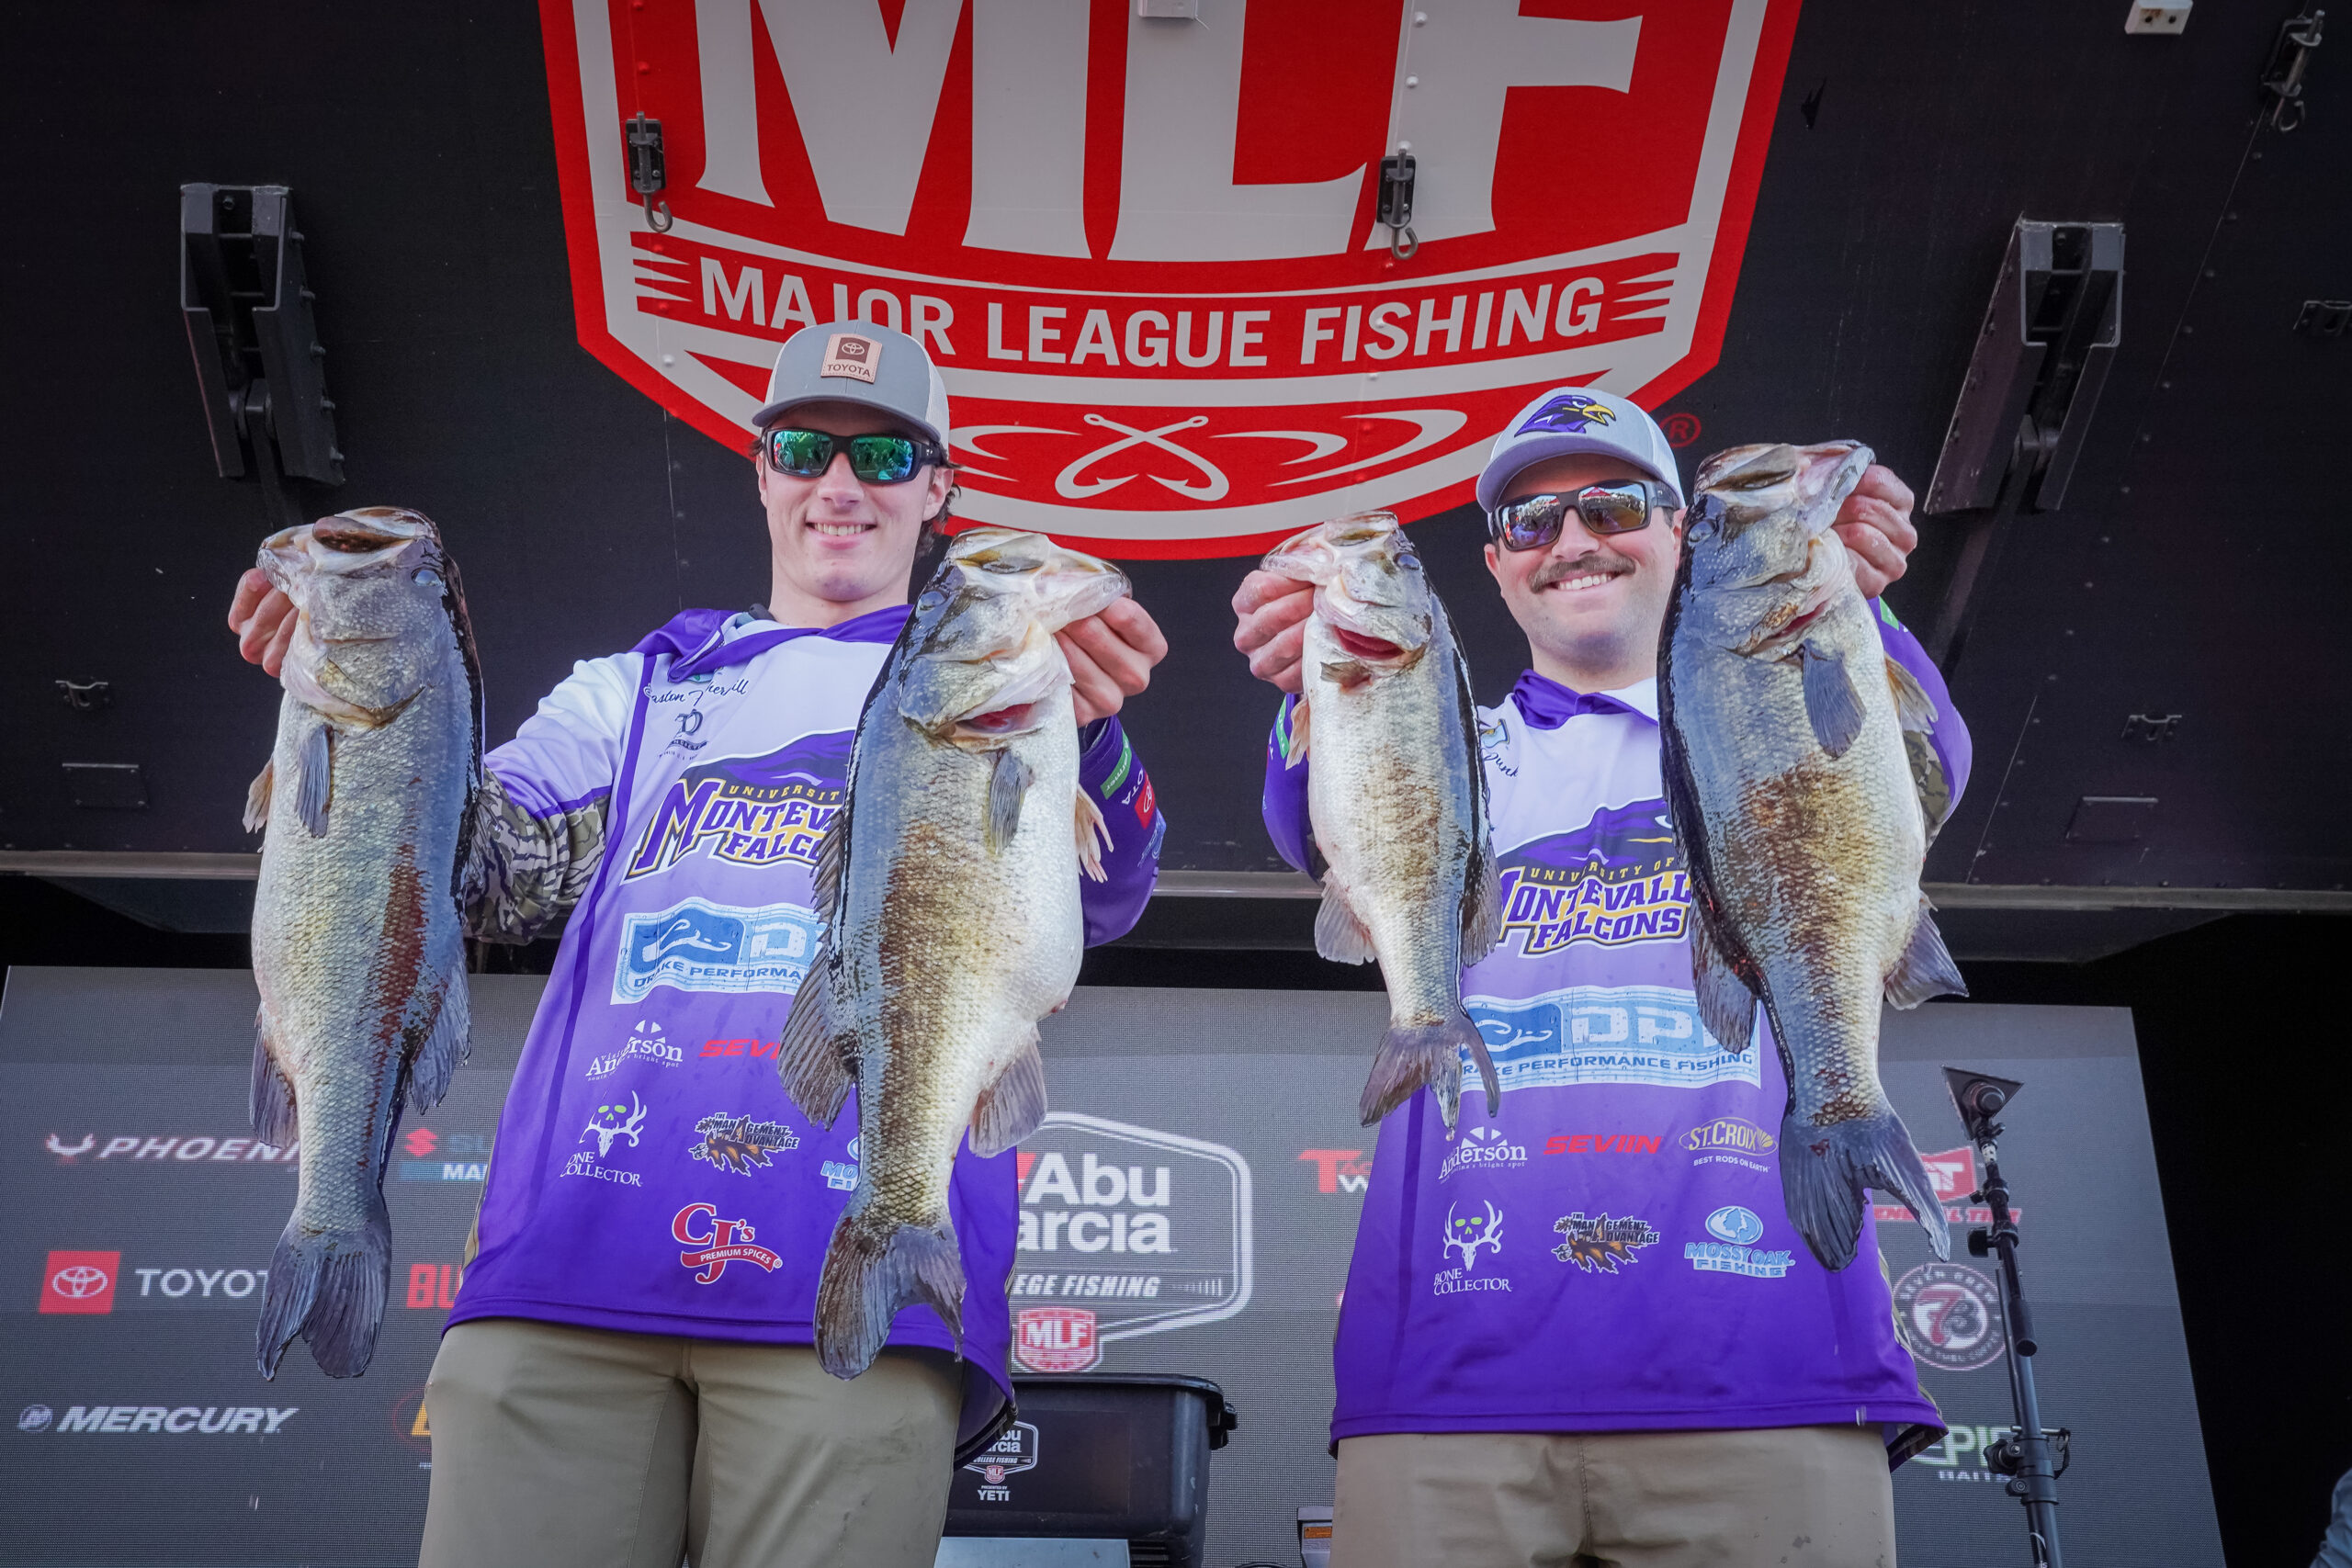 Top 25 bass fishing colleges - Major League Fishing